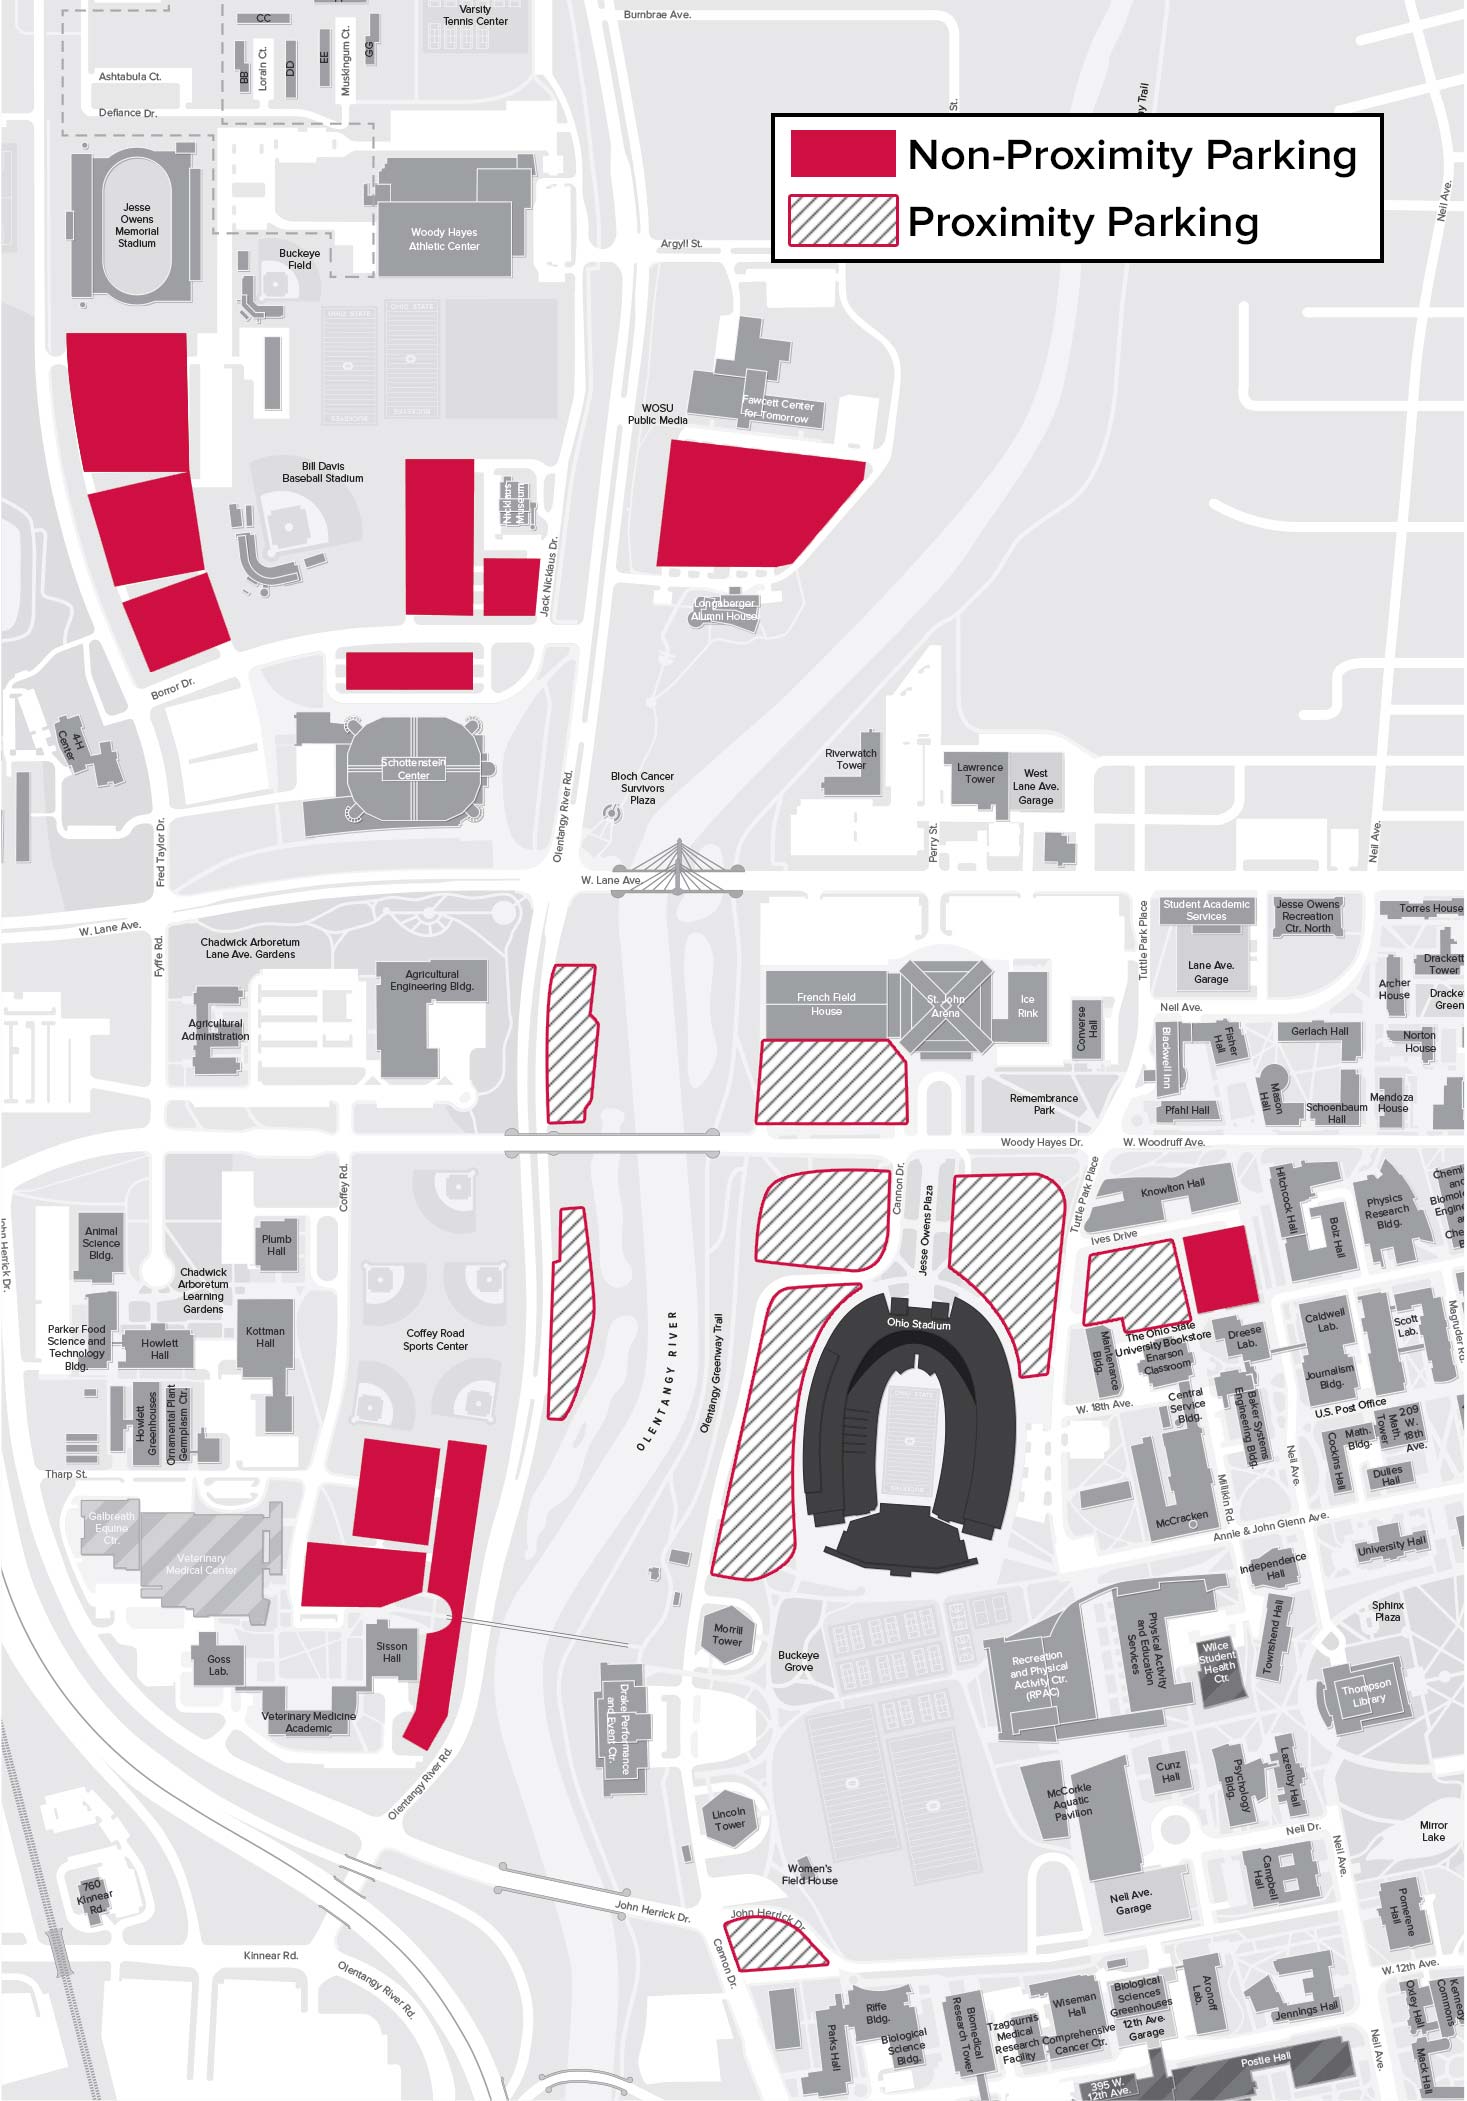 Ohio State Buckeye Club Football Ticket and Parking Information